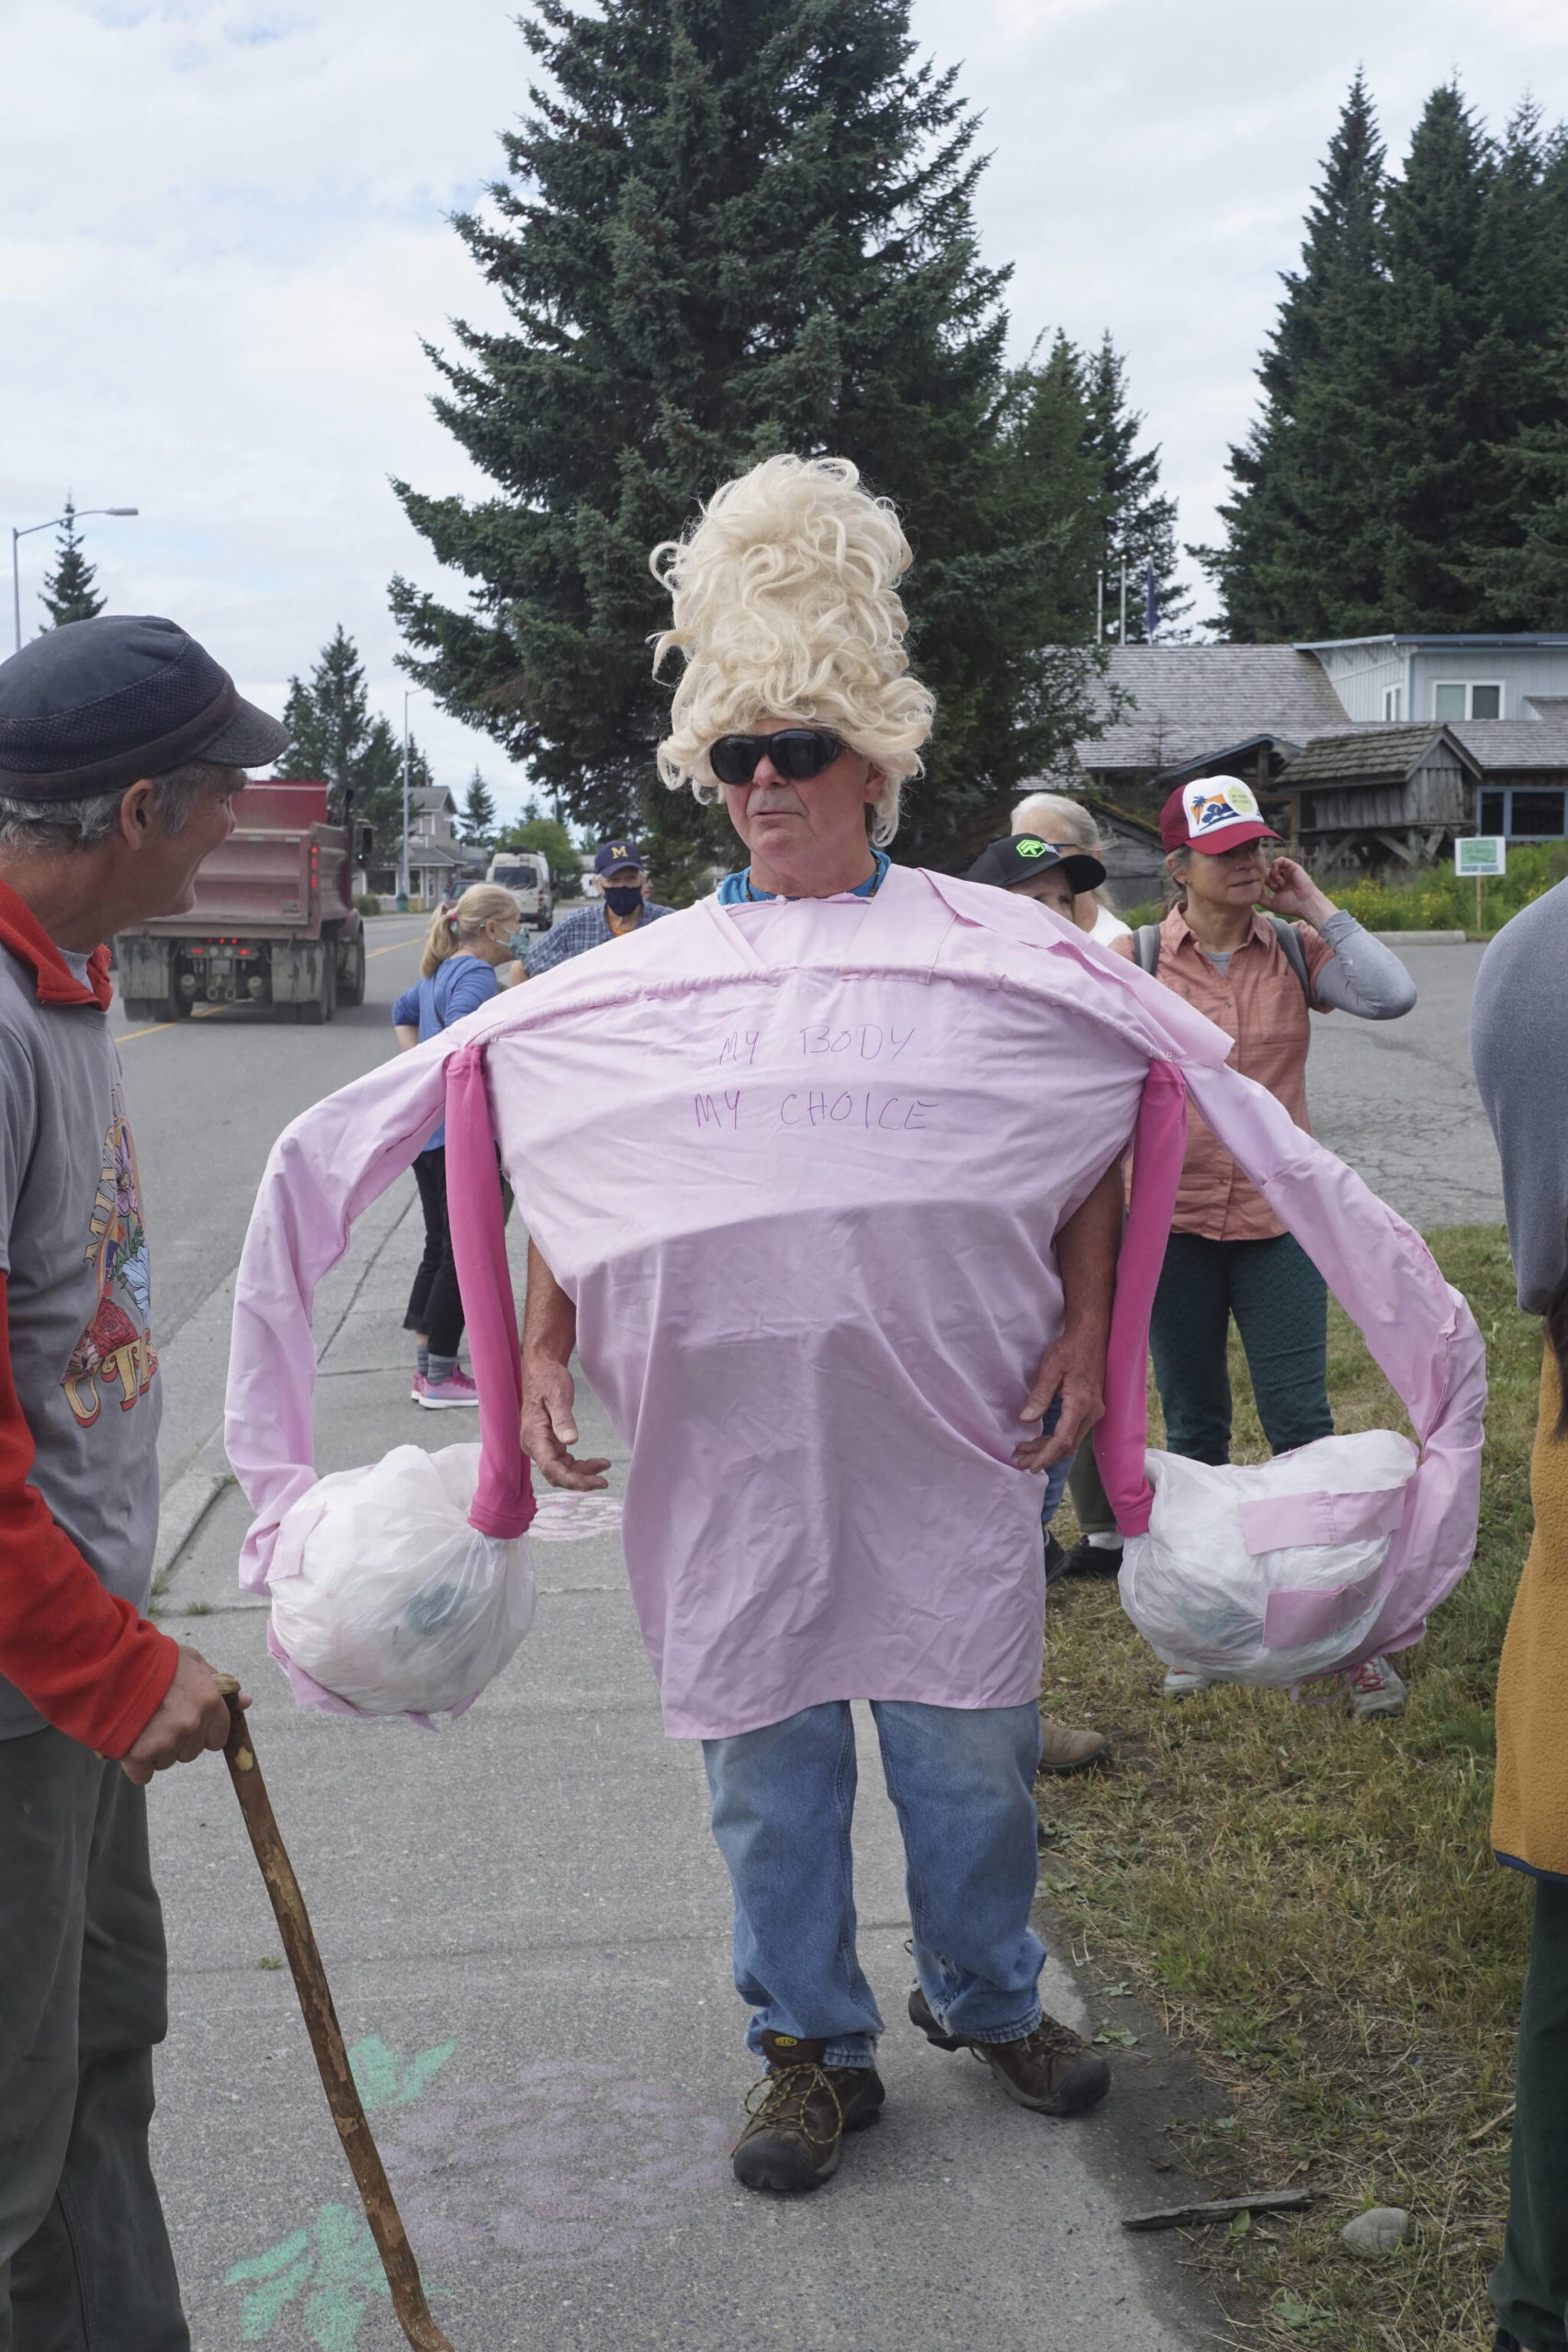 Steve McCasland wears a uterus costume for the "Women's March: Bans Off Our Bodies" protest on Saturday, July 9, 2022, in Homer, Alaska. (Photo by Michael Armstrong/Homer News)